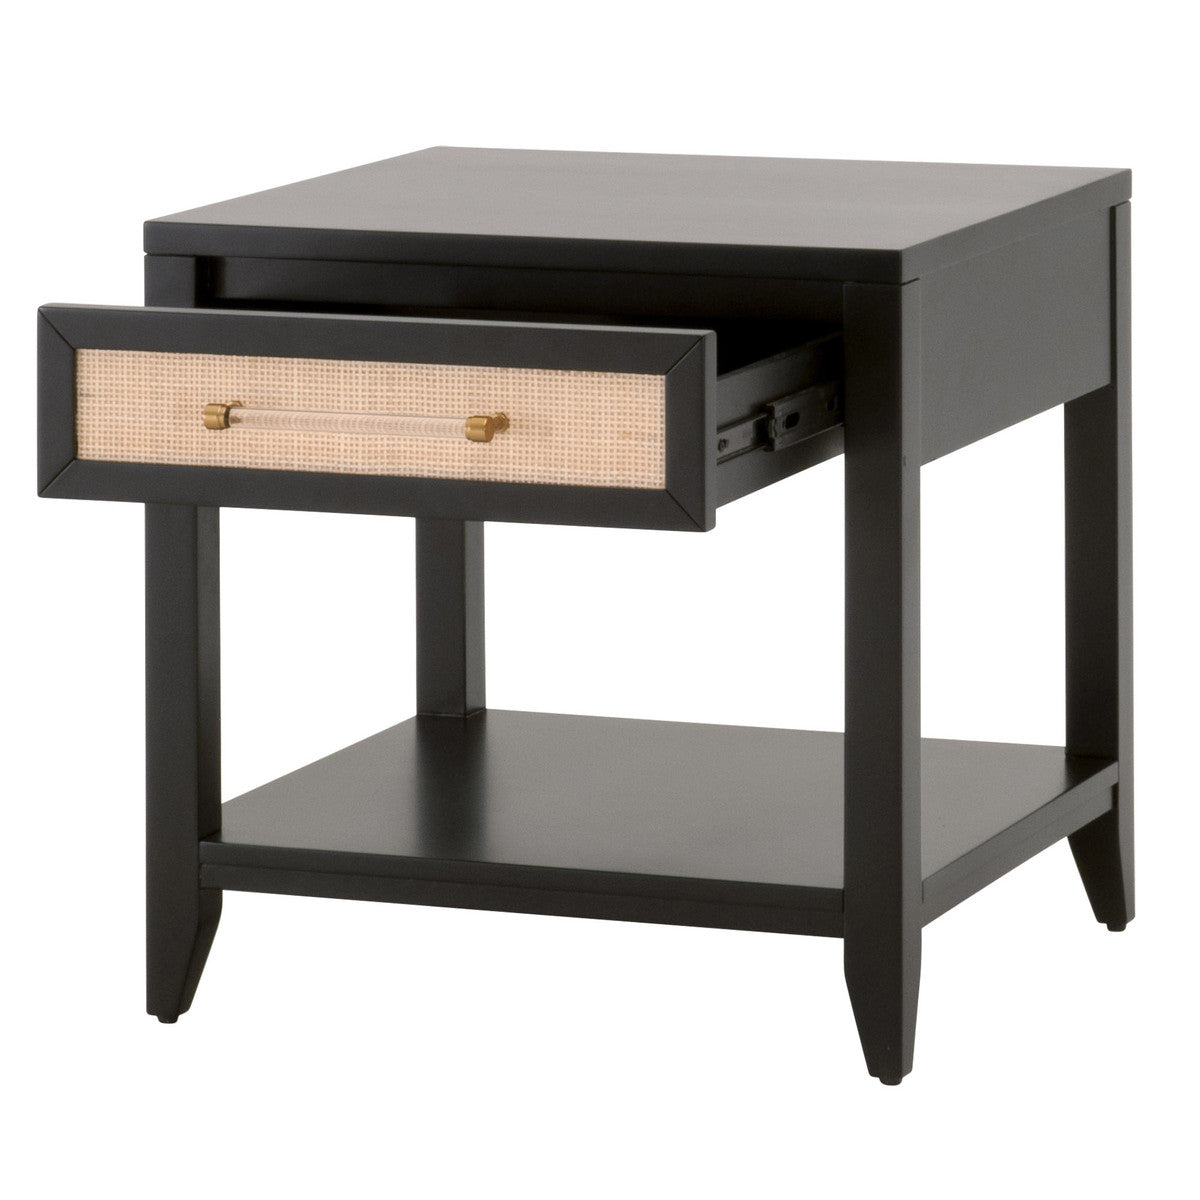 Essentials For Living Nightstands & Side Tables - Holland 1-Drawer Side Table Brushed Black Acacia, Natural Rattan